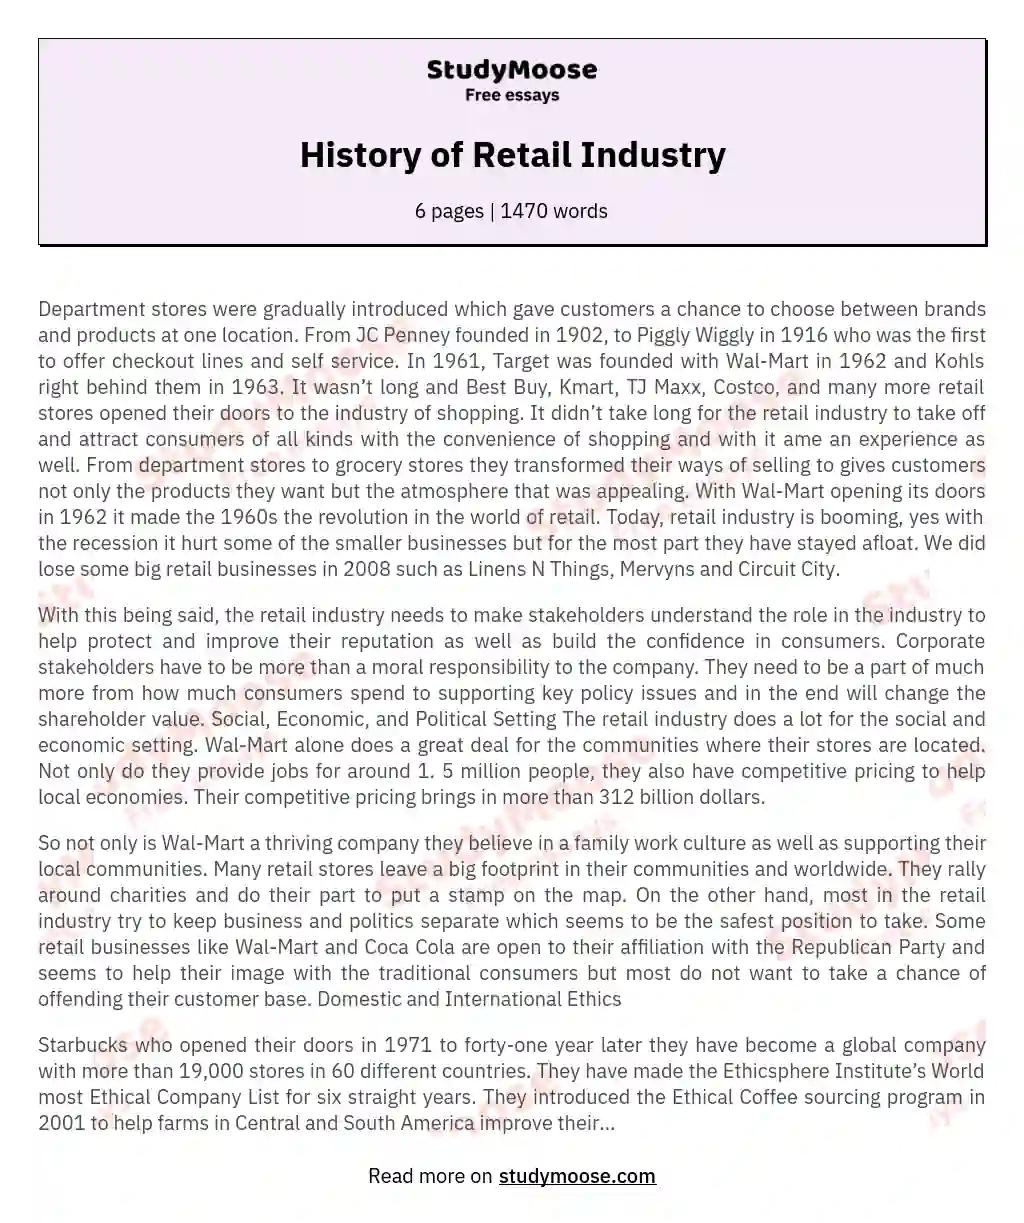 History of Retail Industry essay